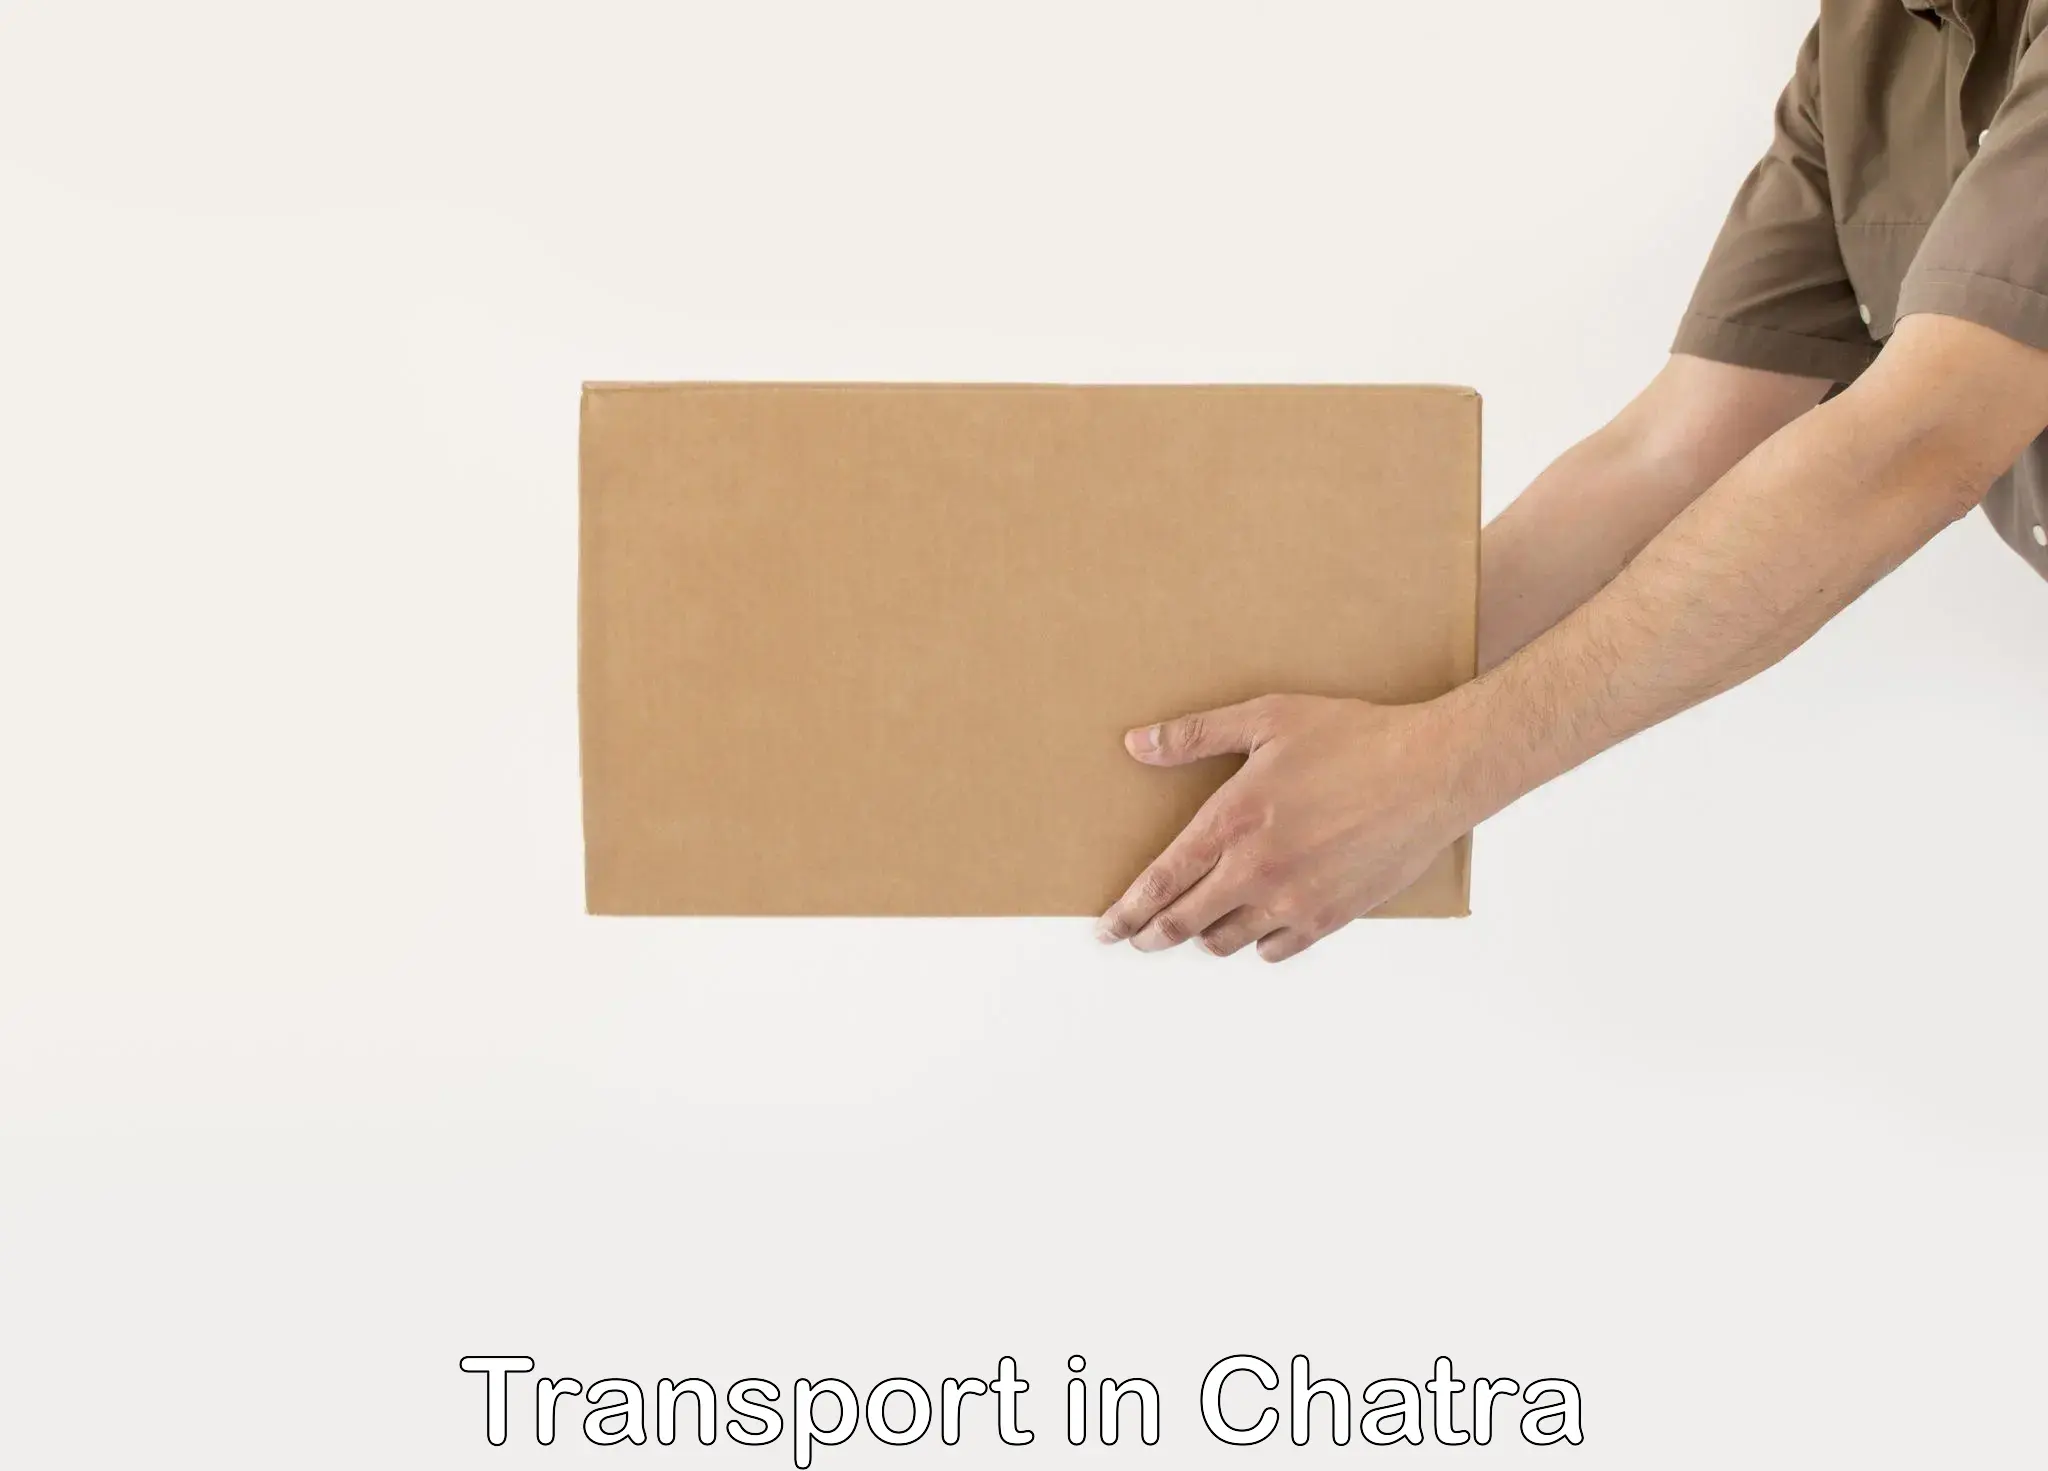 Online transport booking in Chatra